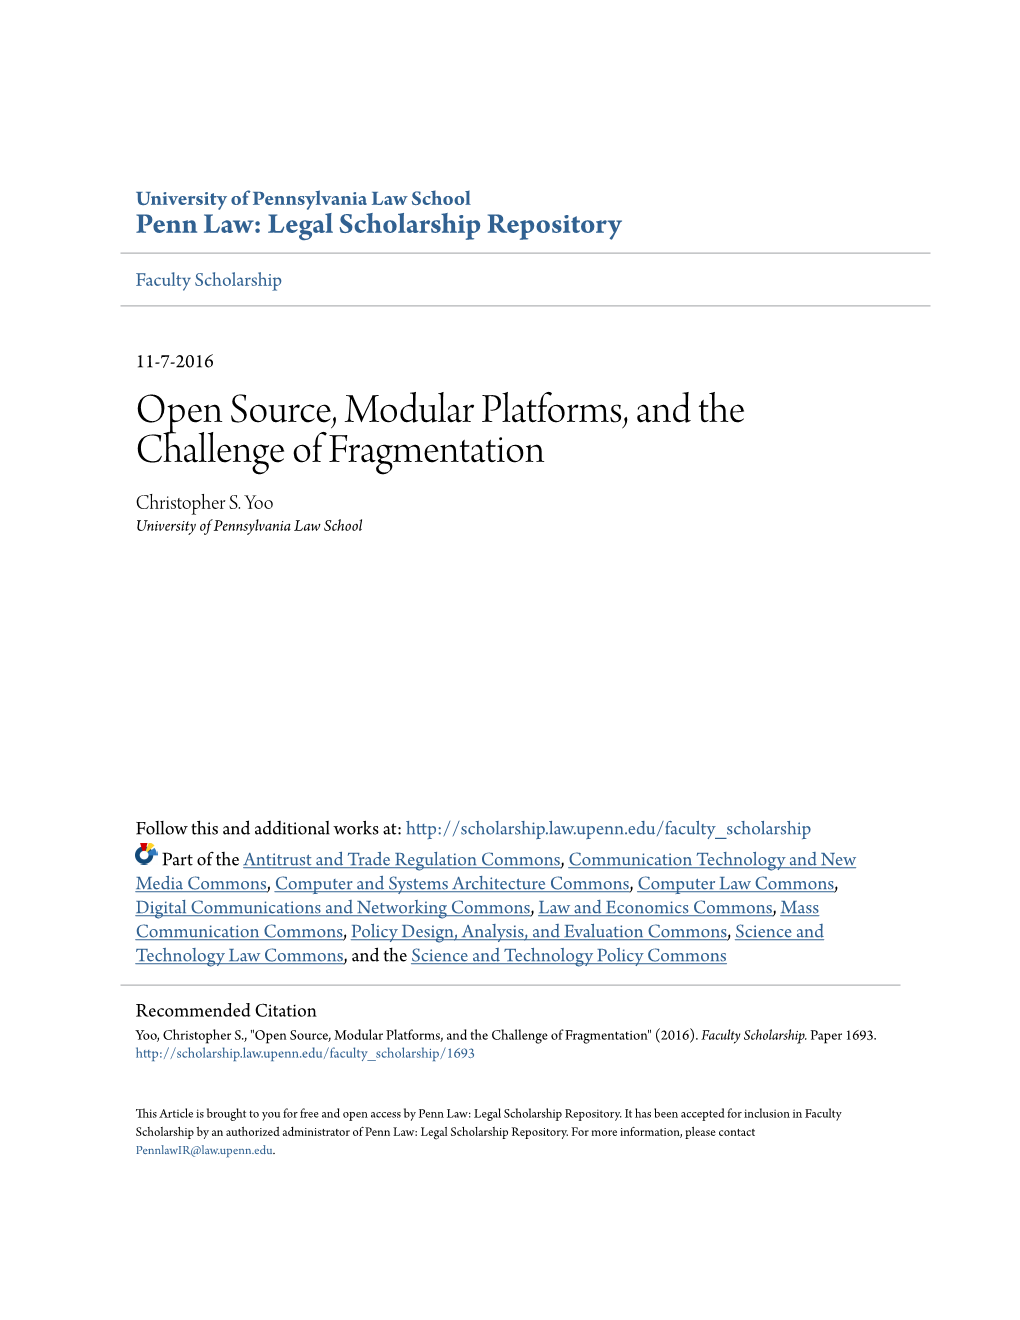 Download Open Source, Modular Platforms and the Challenge Of